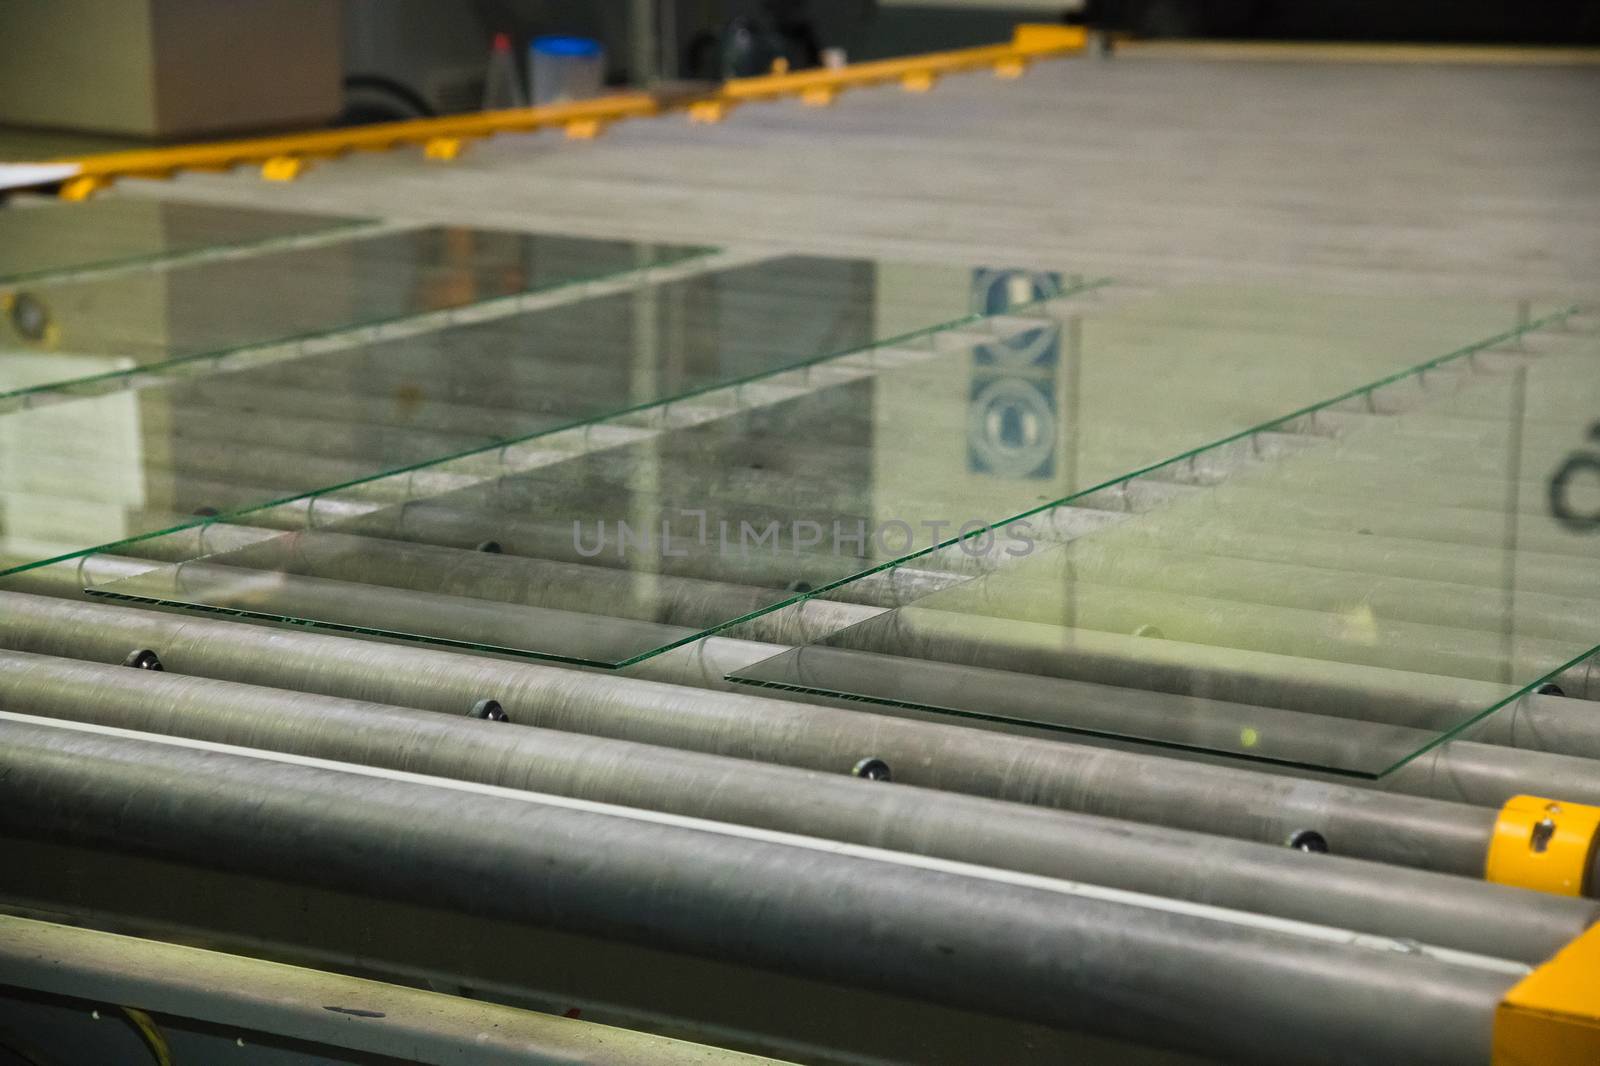 Glass factory. Glass Panels for PVC Windows and Doors Manufacturing, tempered float glass panels